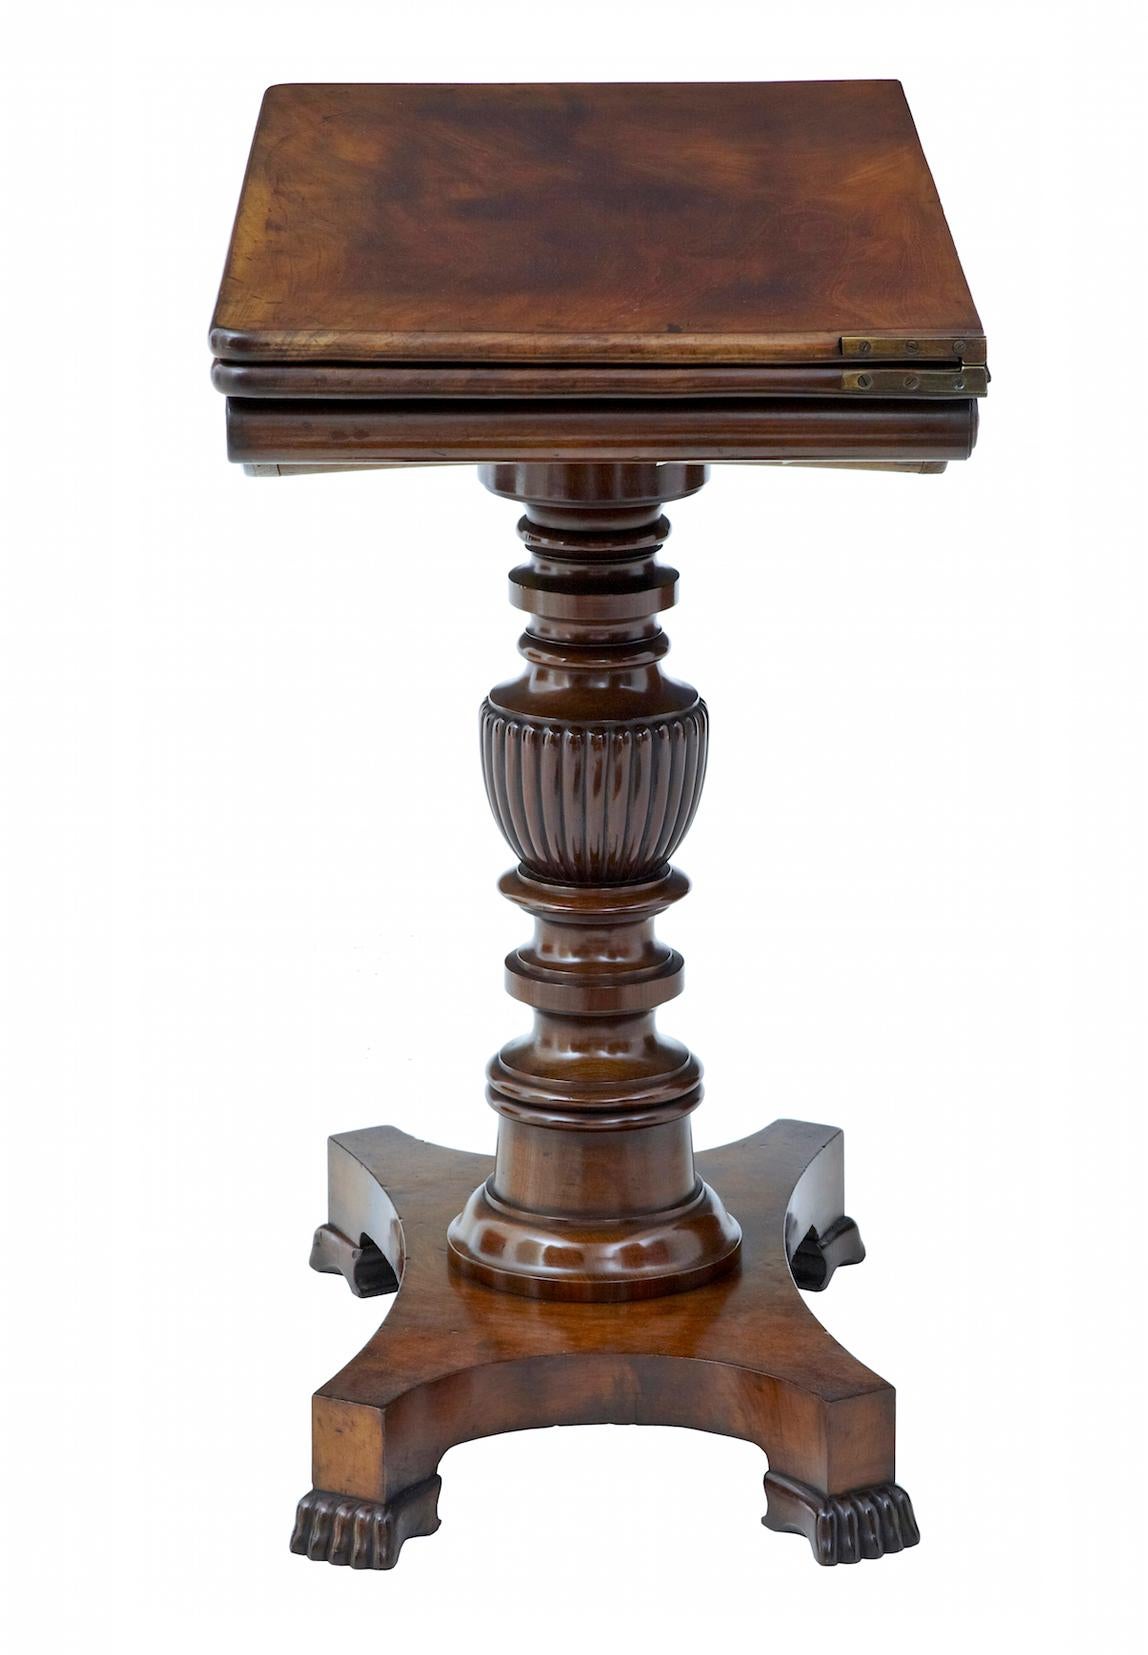 Early victorian 19th century mahogany games table circa 1840.

Fine quality carved mahogany flip top tea table. Solid mahogany top with superb colour and figuring, this flips over and twists to form a large usable surface. Below which a carved